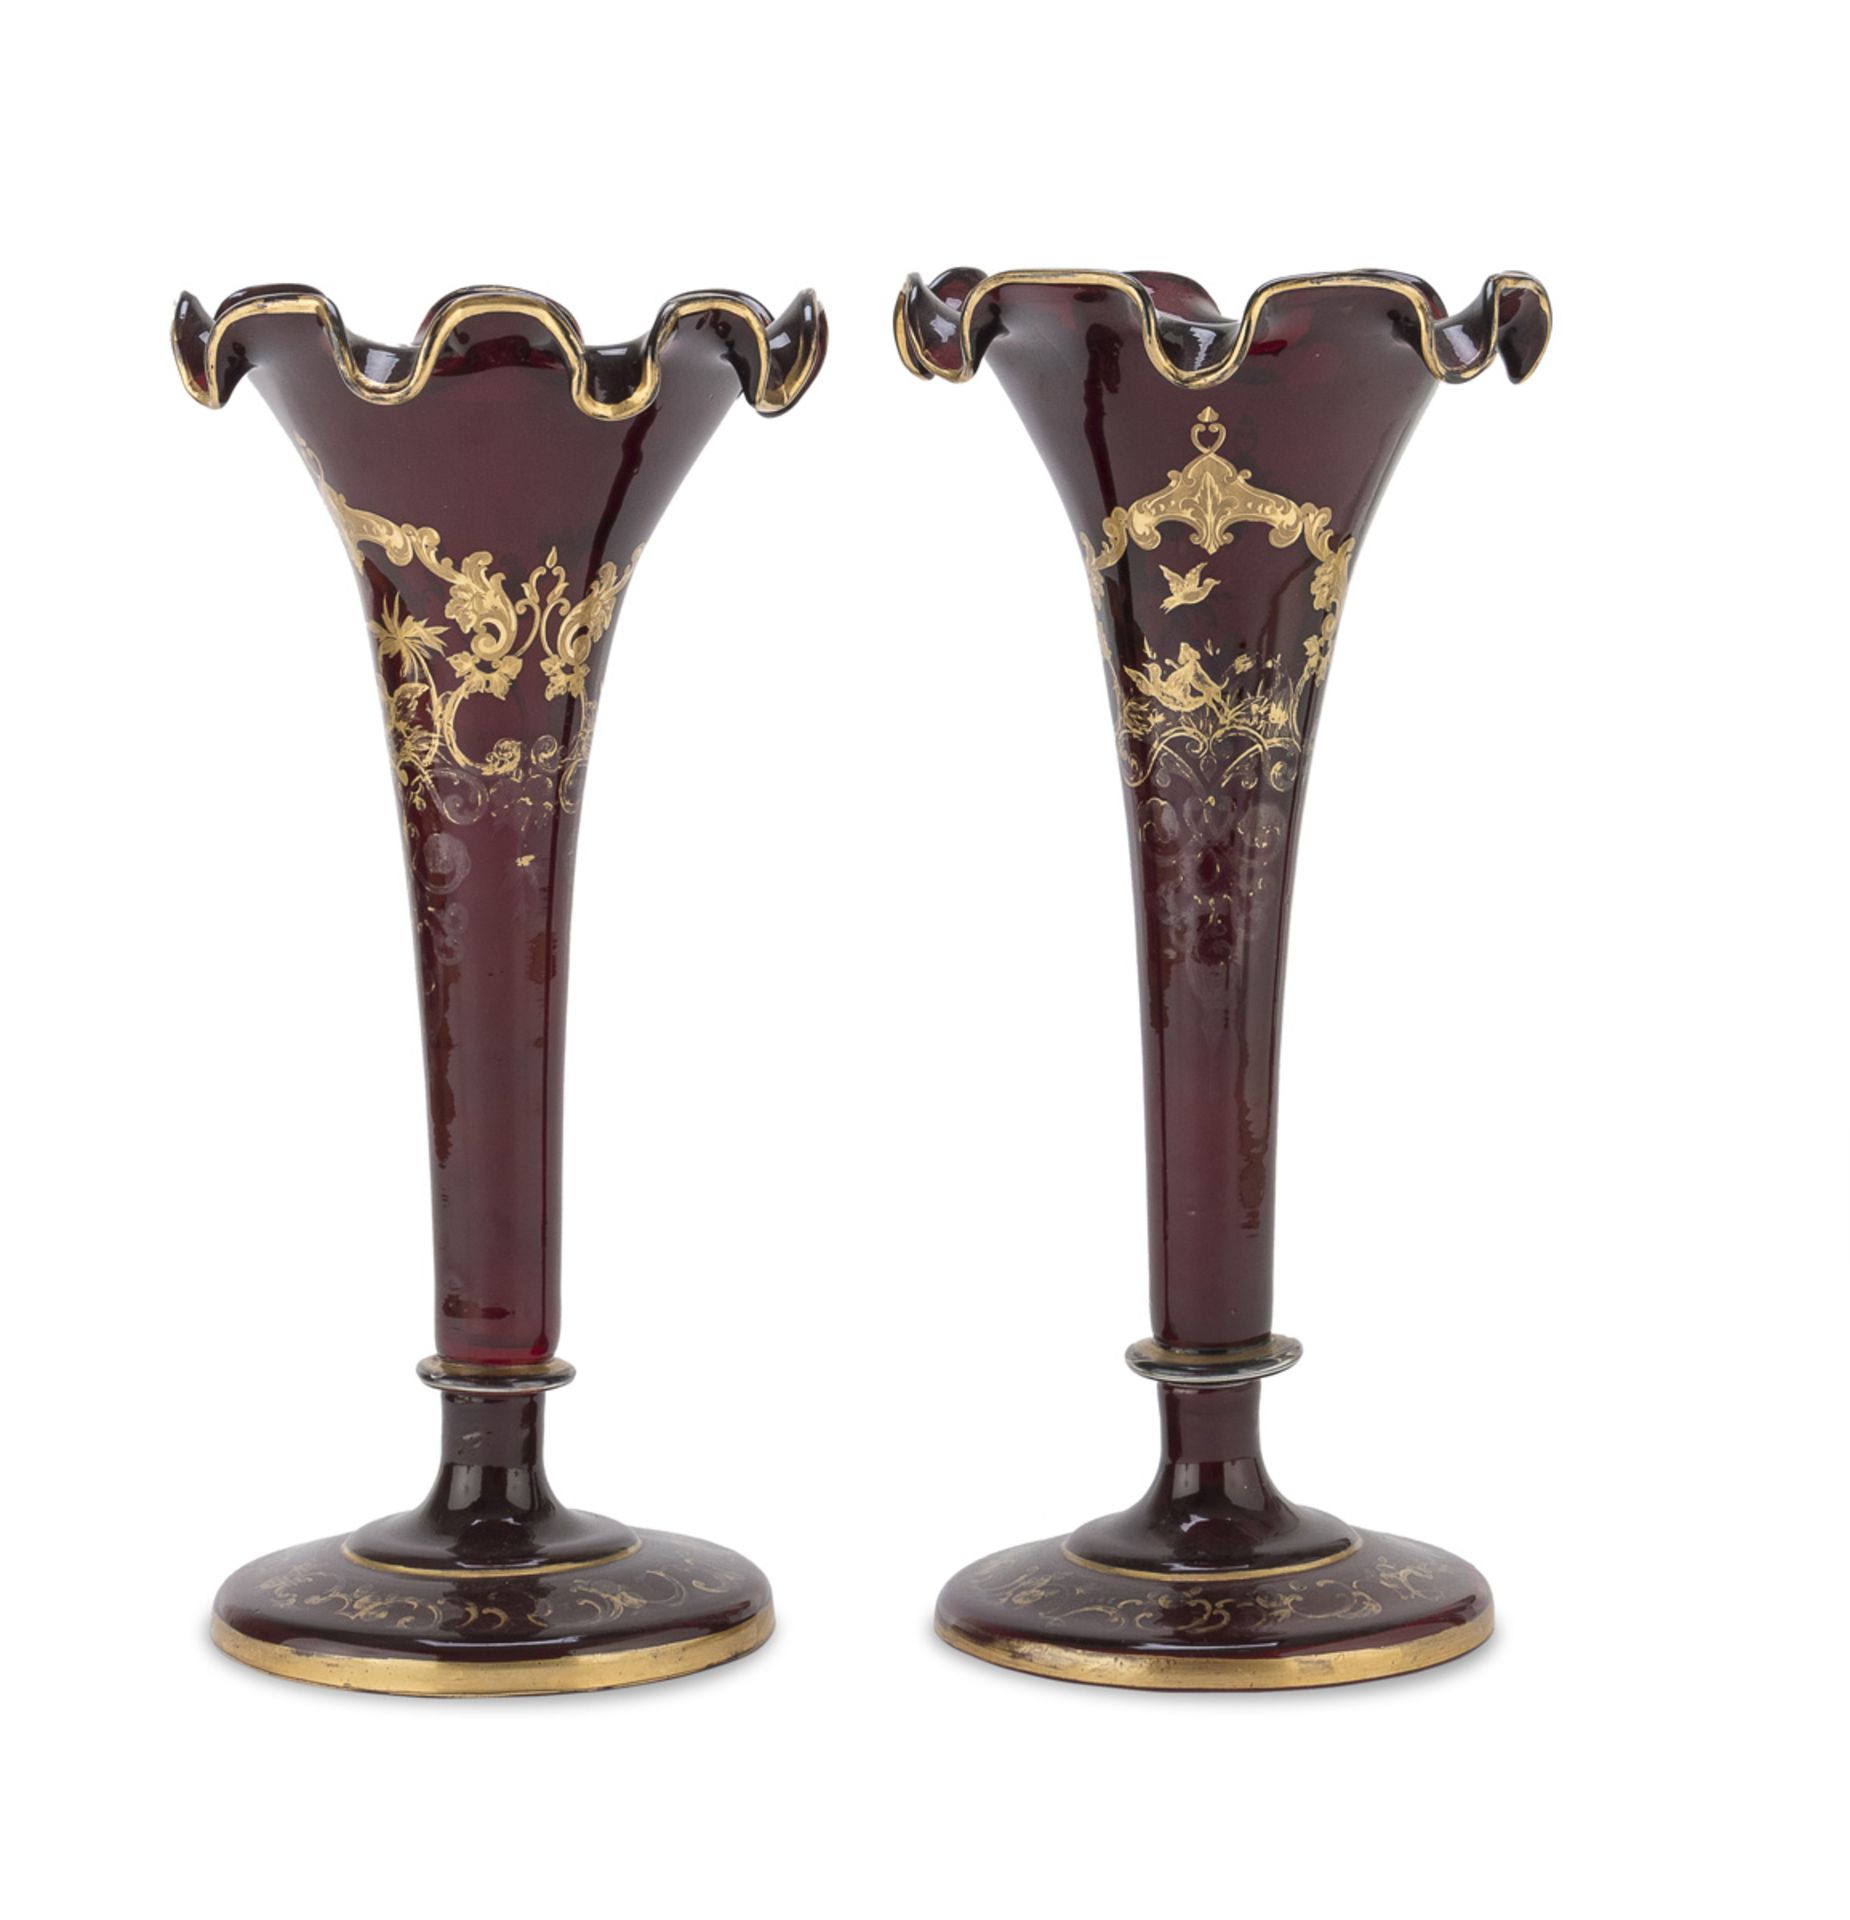 PAIR OF RUBY GLASS VASES PROBABLY VIENNA LATE 19TH CENTURY